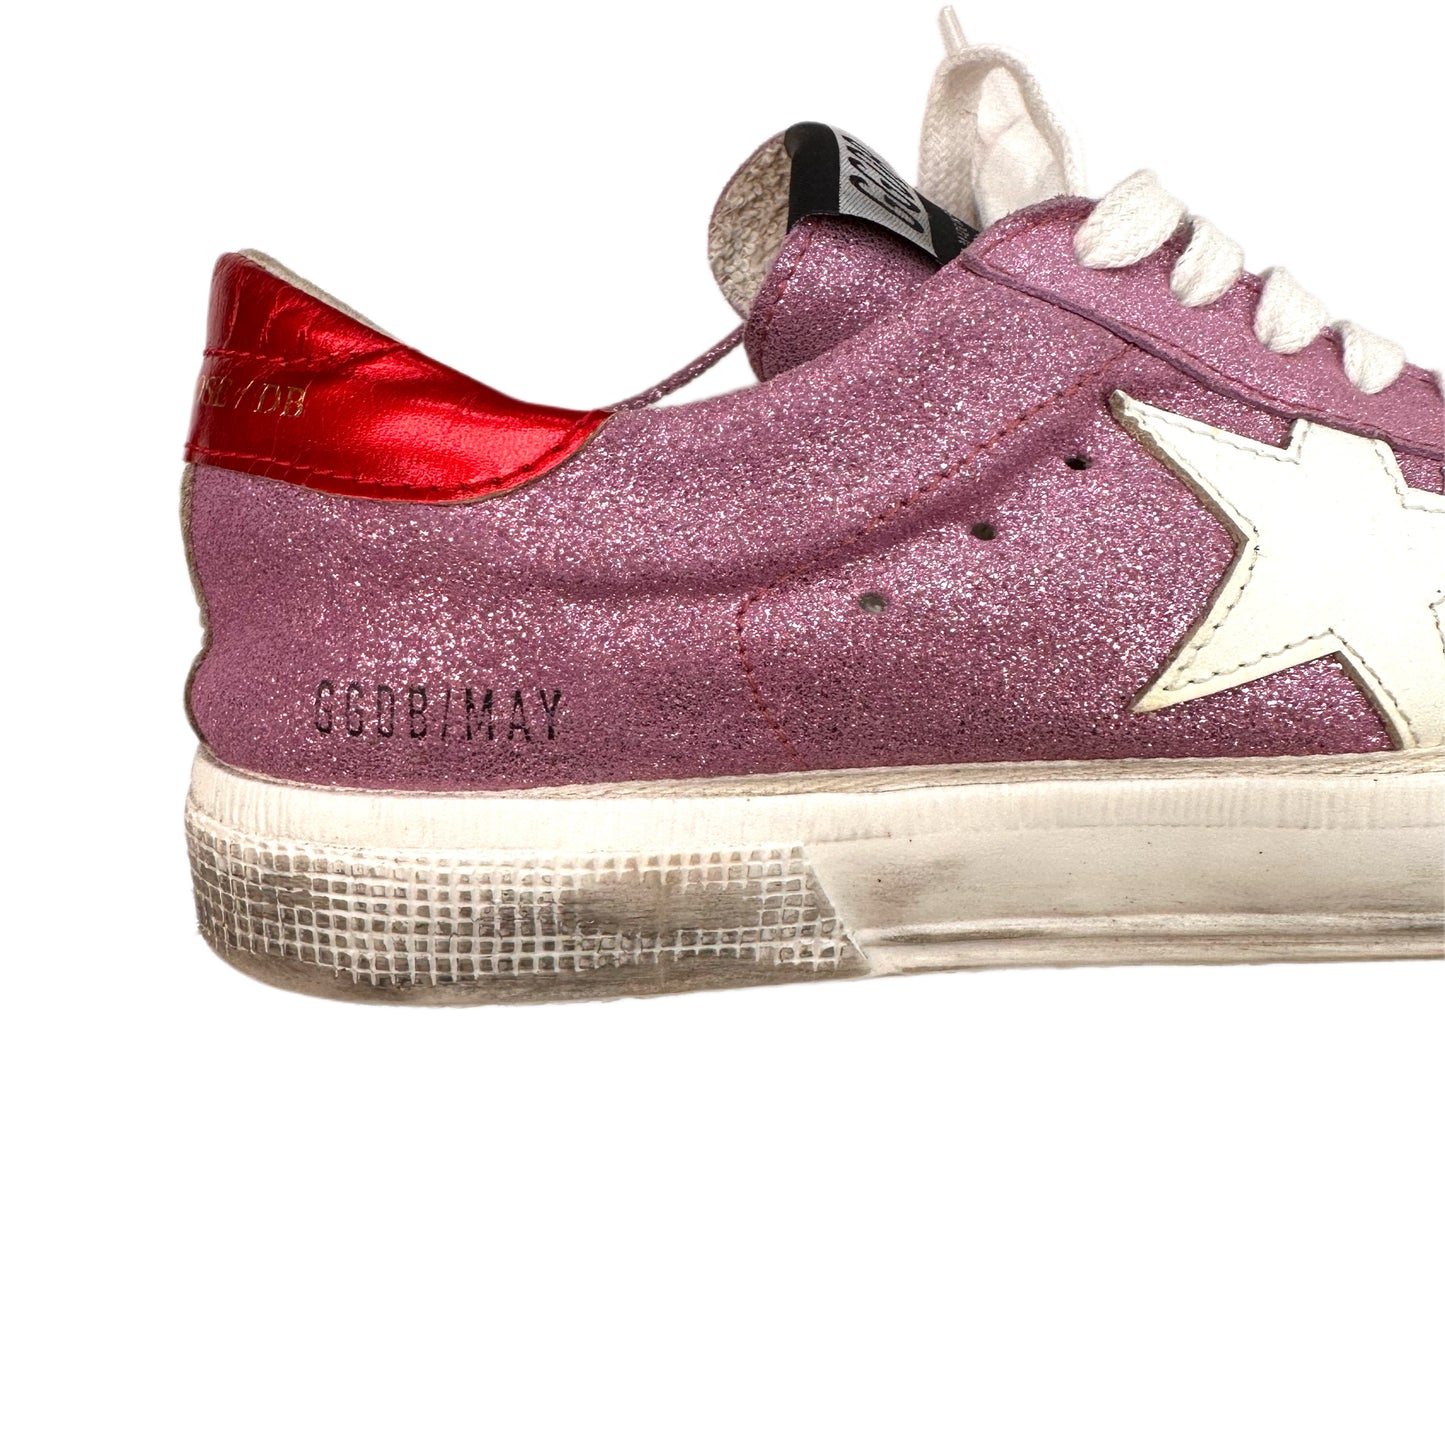 GOLDEN GOOSE Pink Glitter Leather Size 39